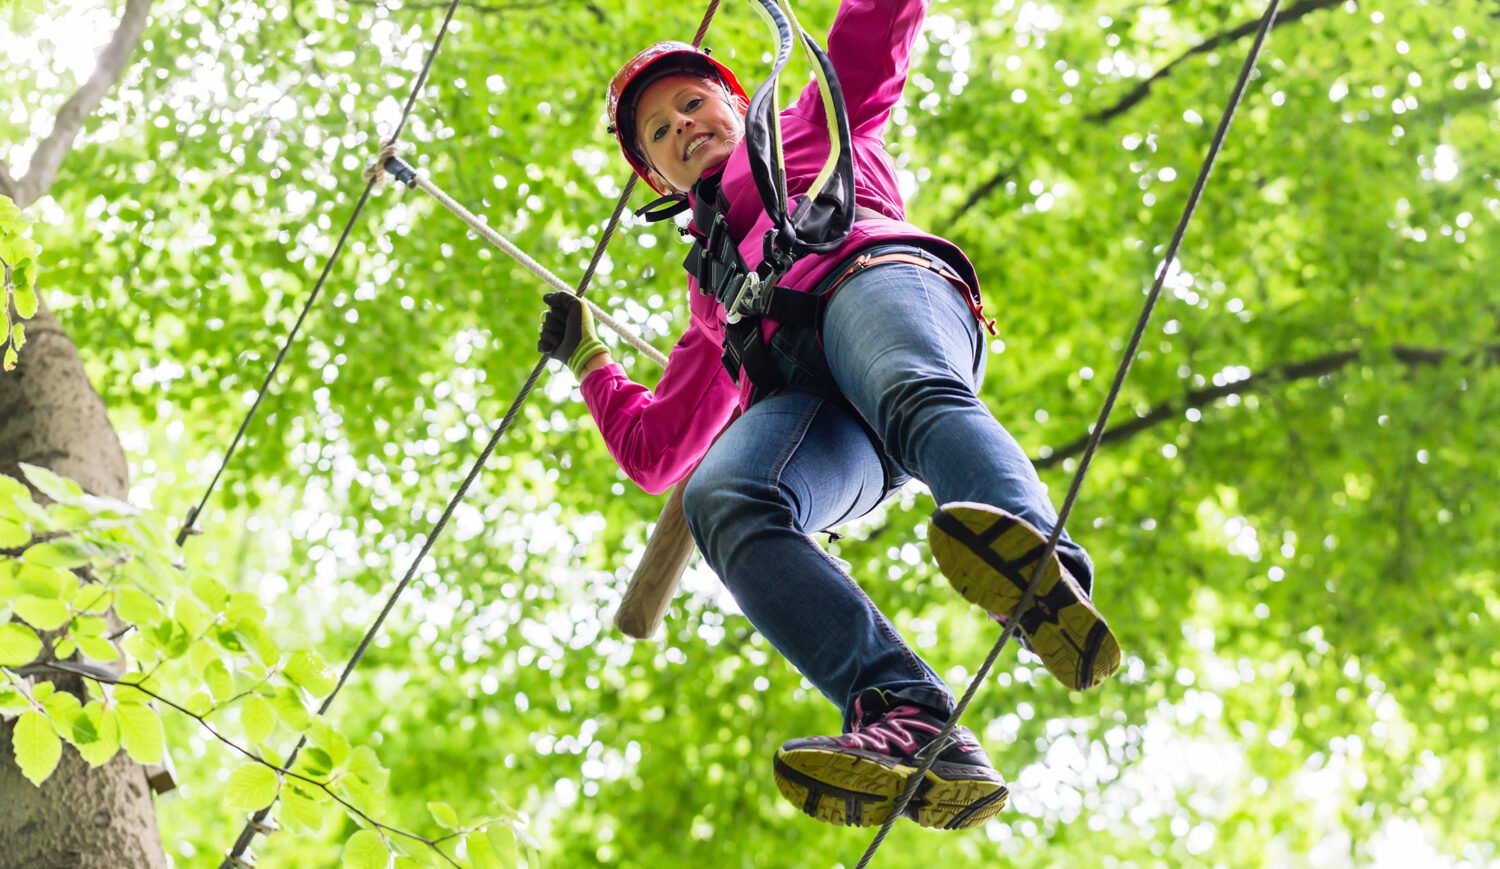 There are great high ropes courses in the Bremen area